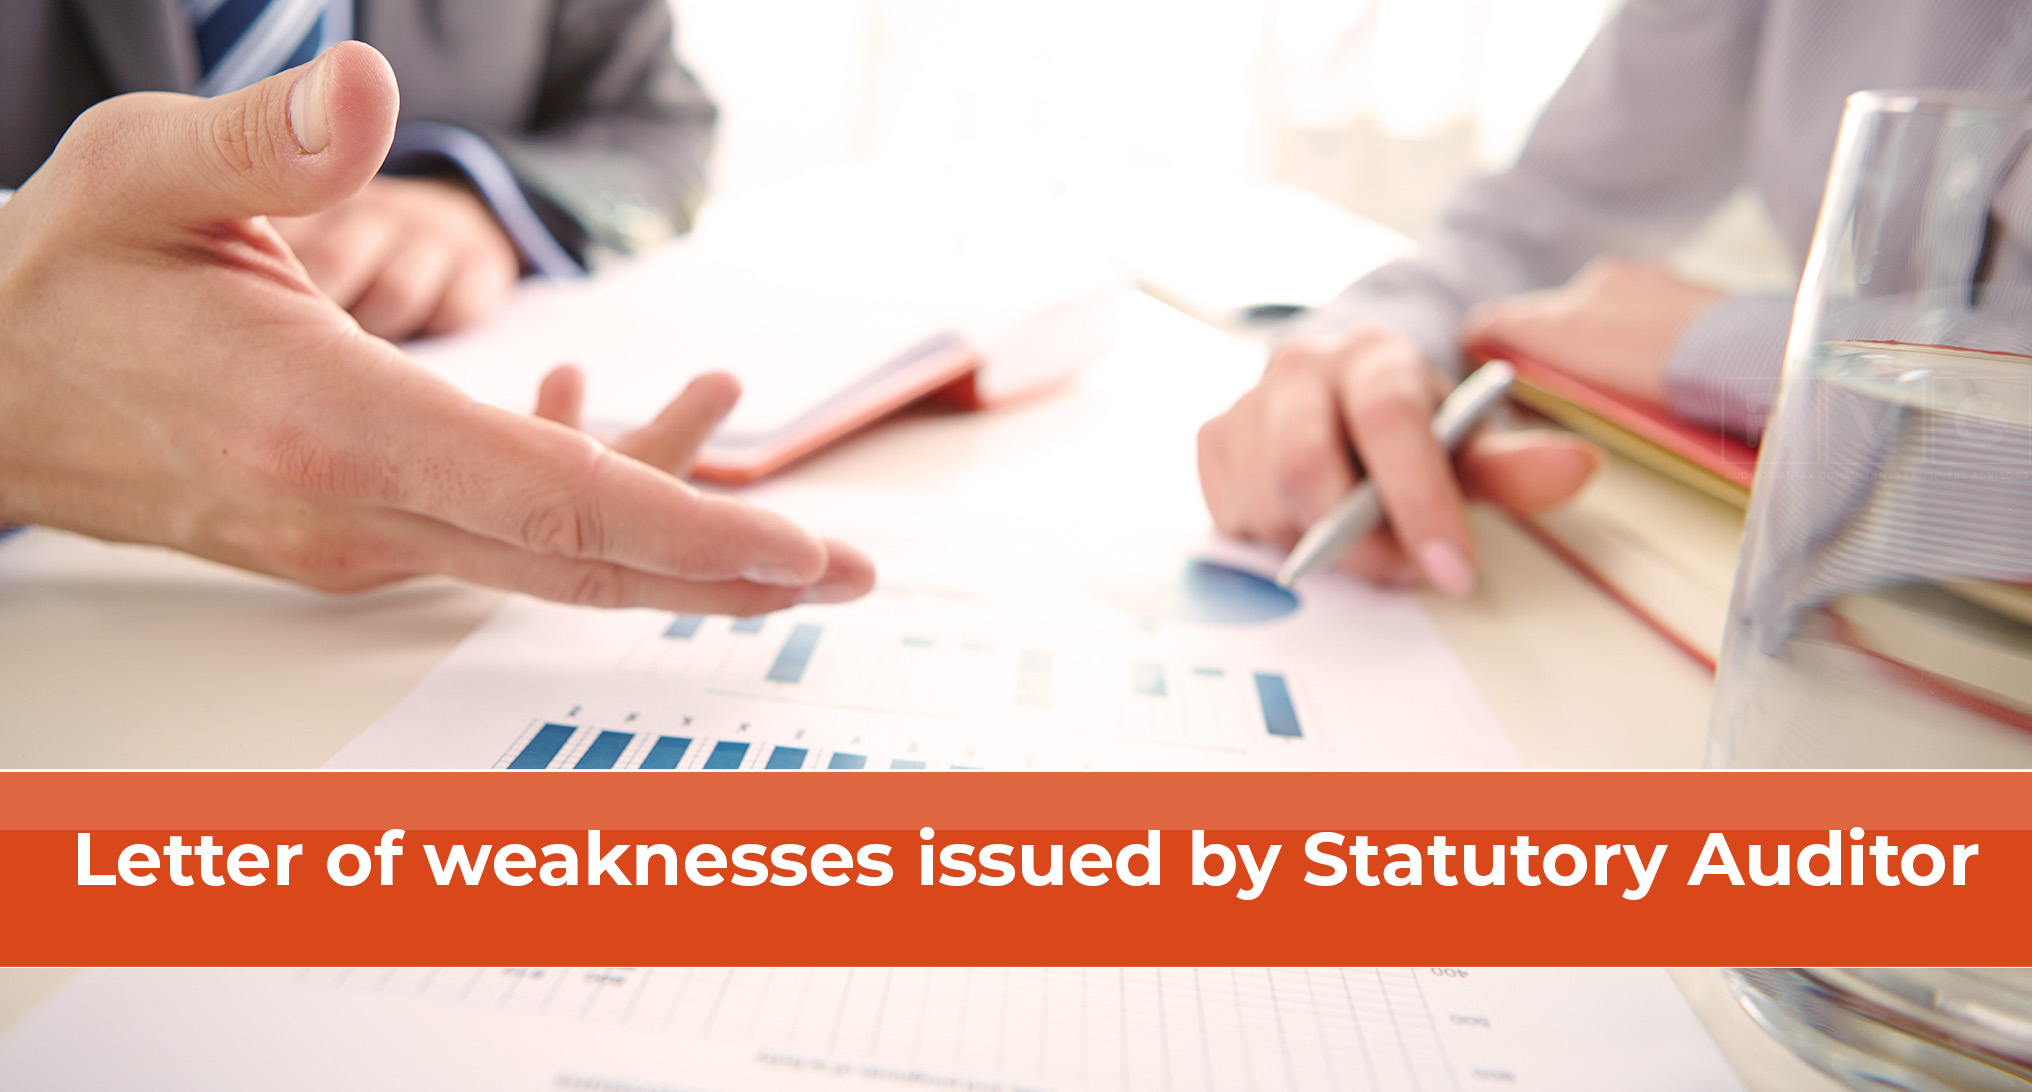 Letter of weaknesses issued by Statutory Auditor